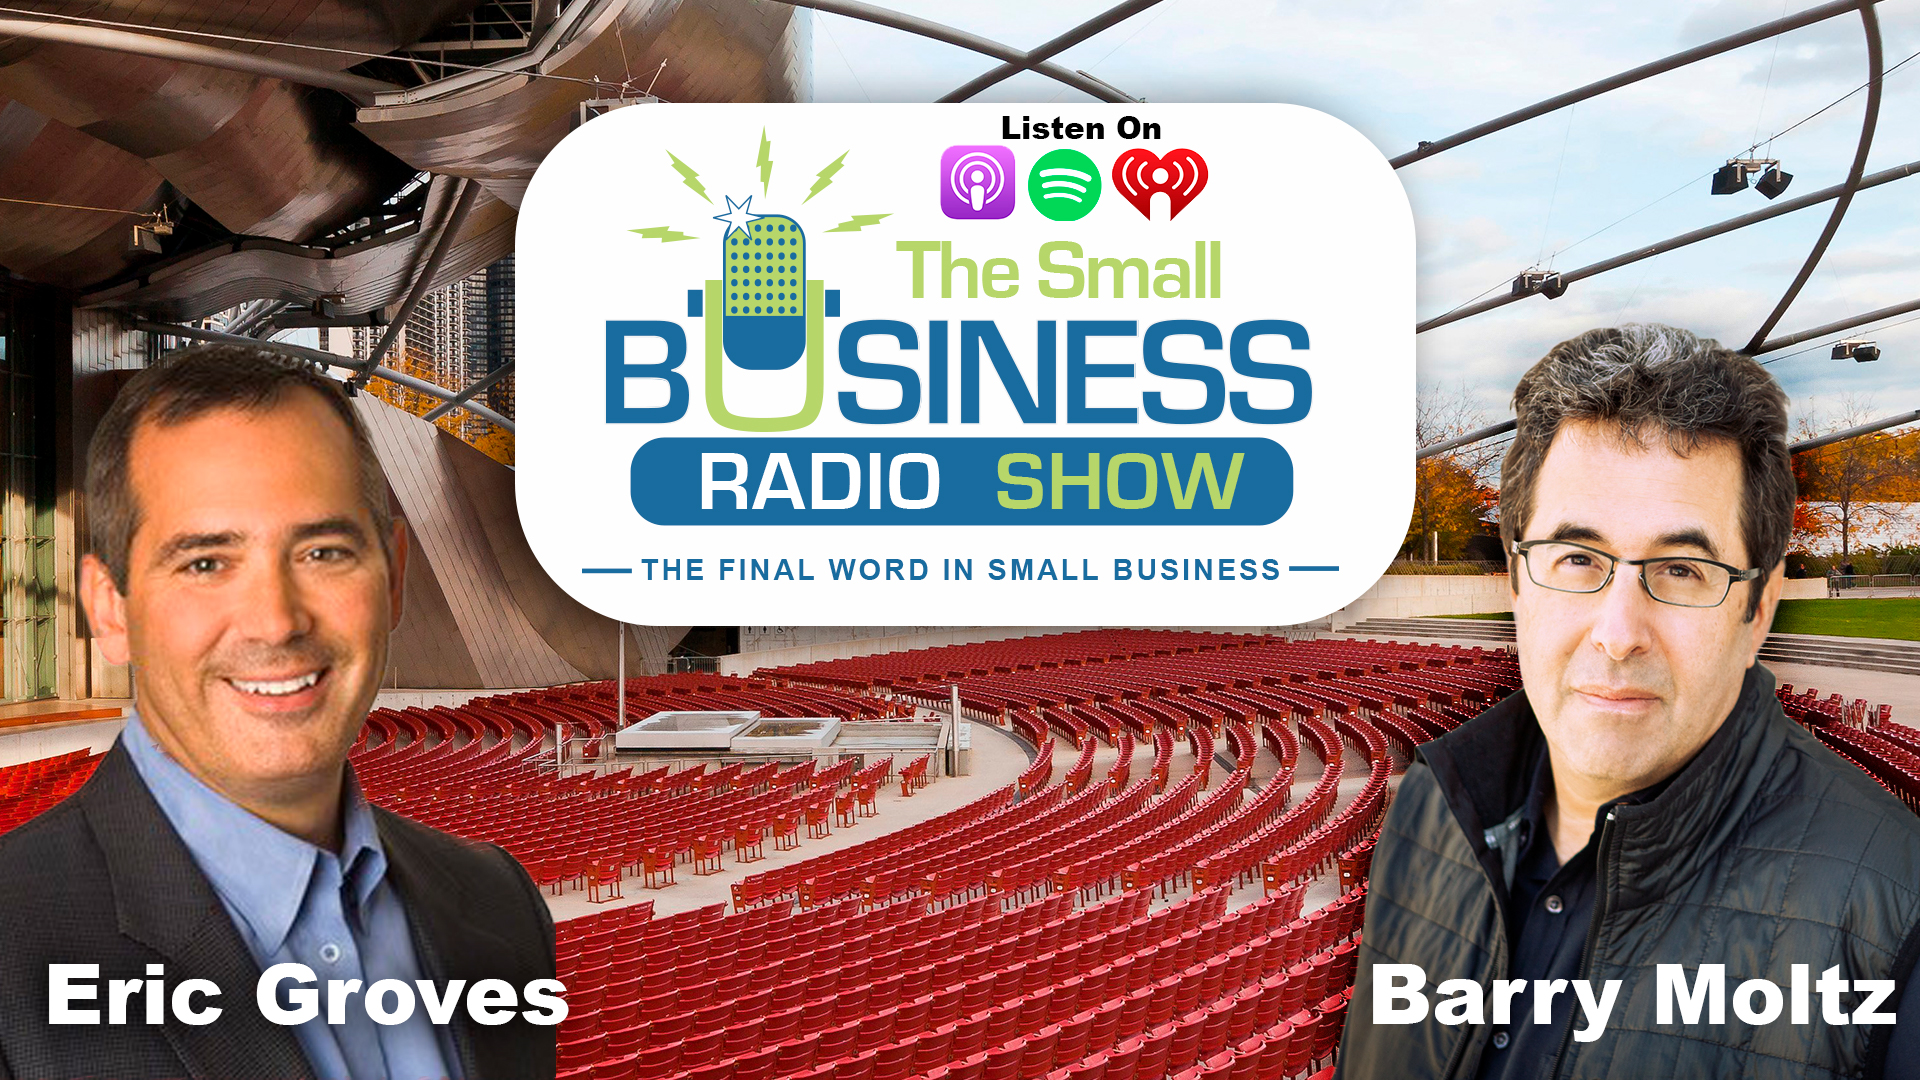 Eric Groves on The Small Business Radio Show